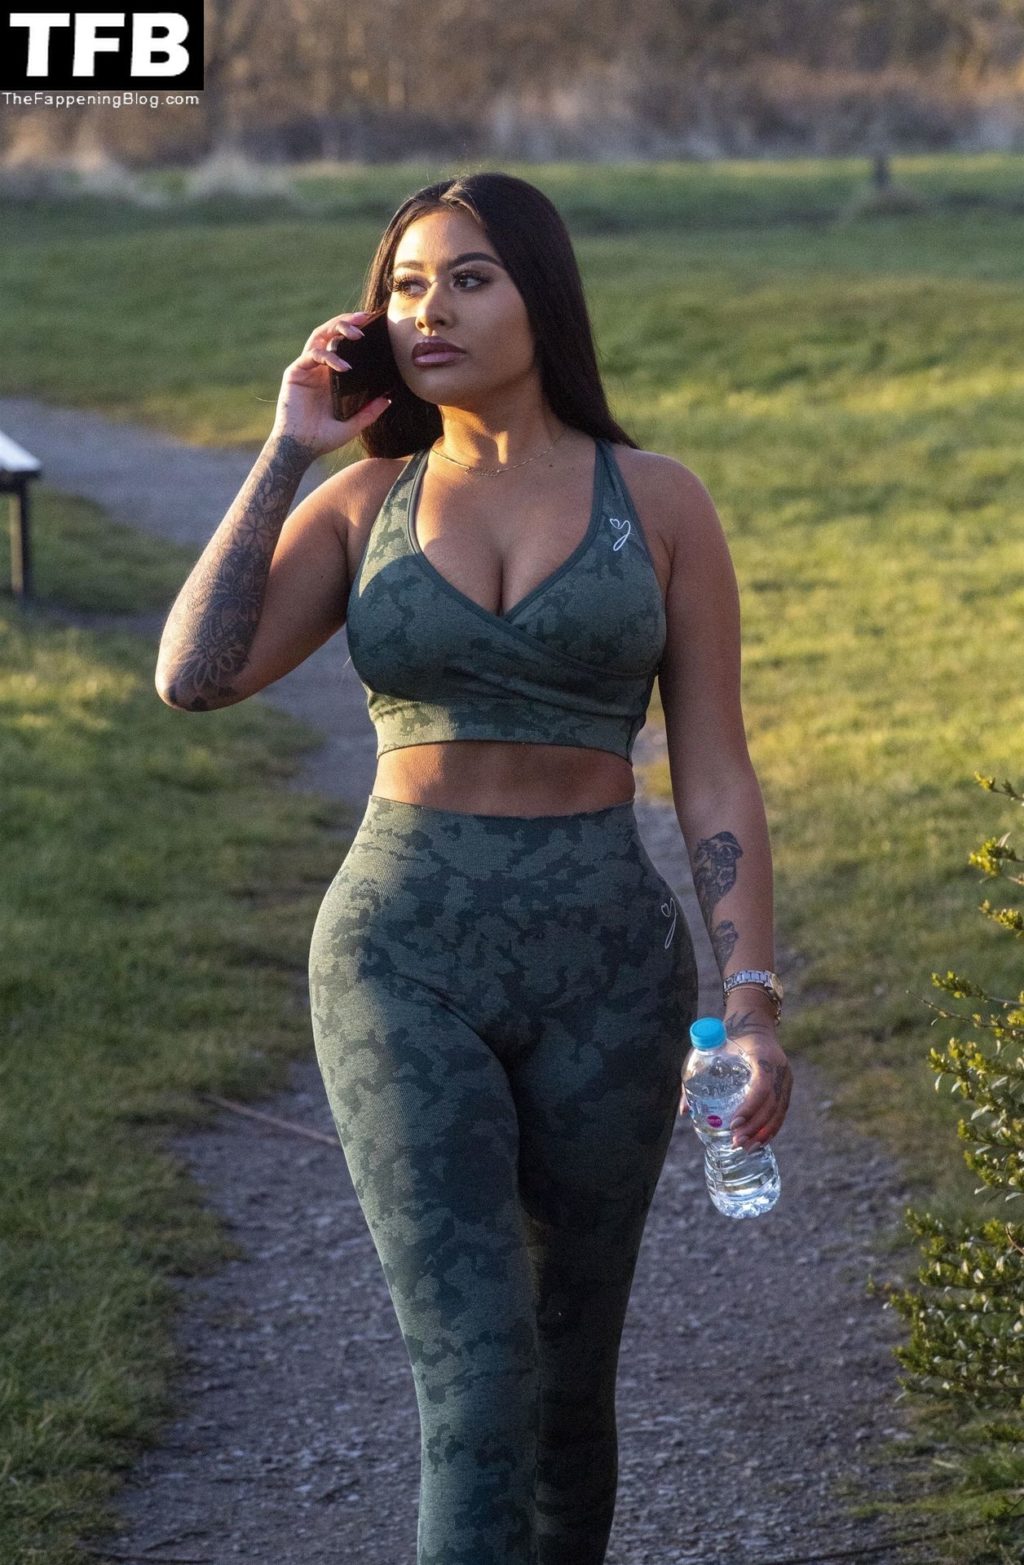 Nikita Jasmine Shows Off Her Ample Cleavage in a Camouflage Exercise Outfit (10 Photos)